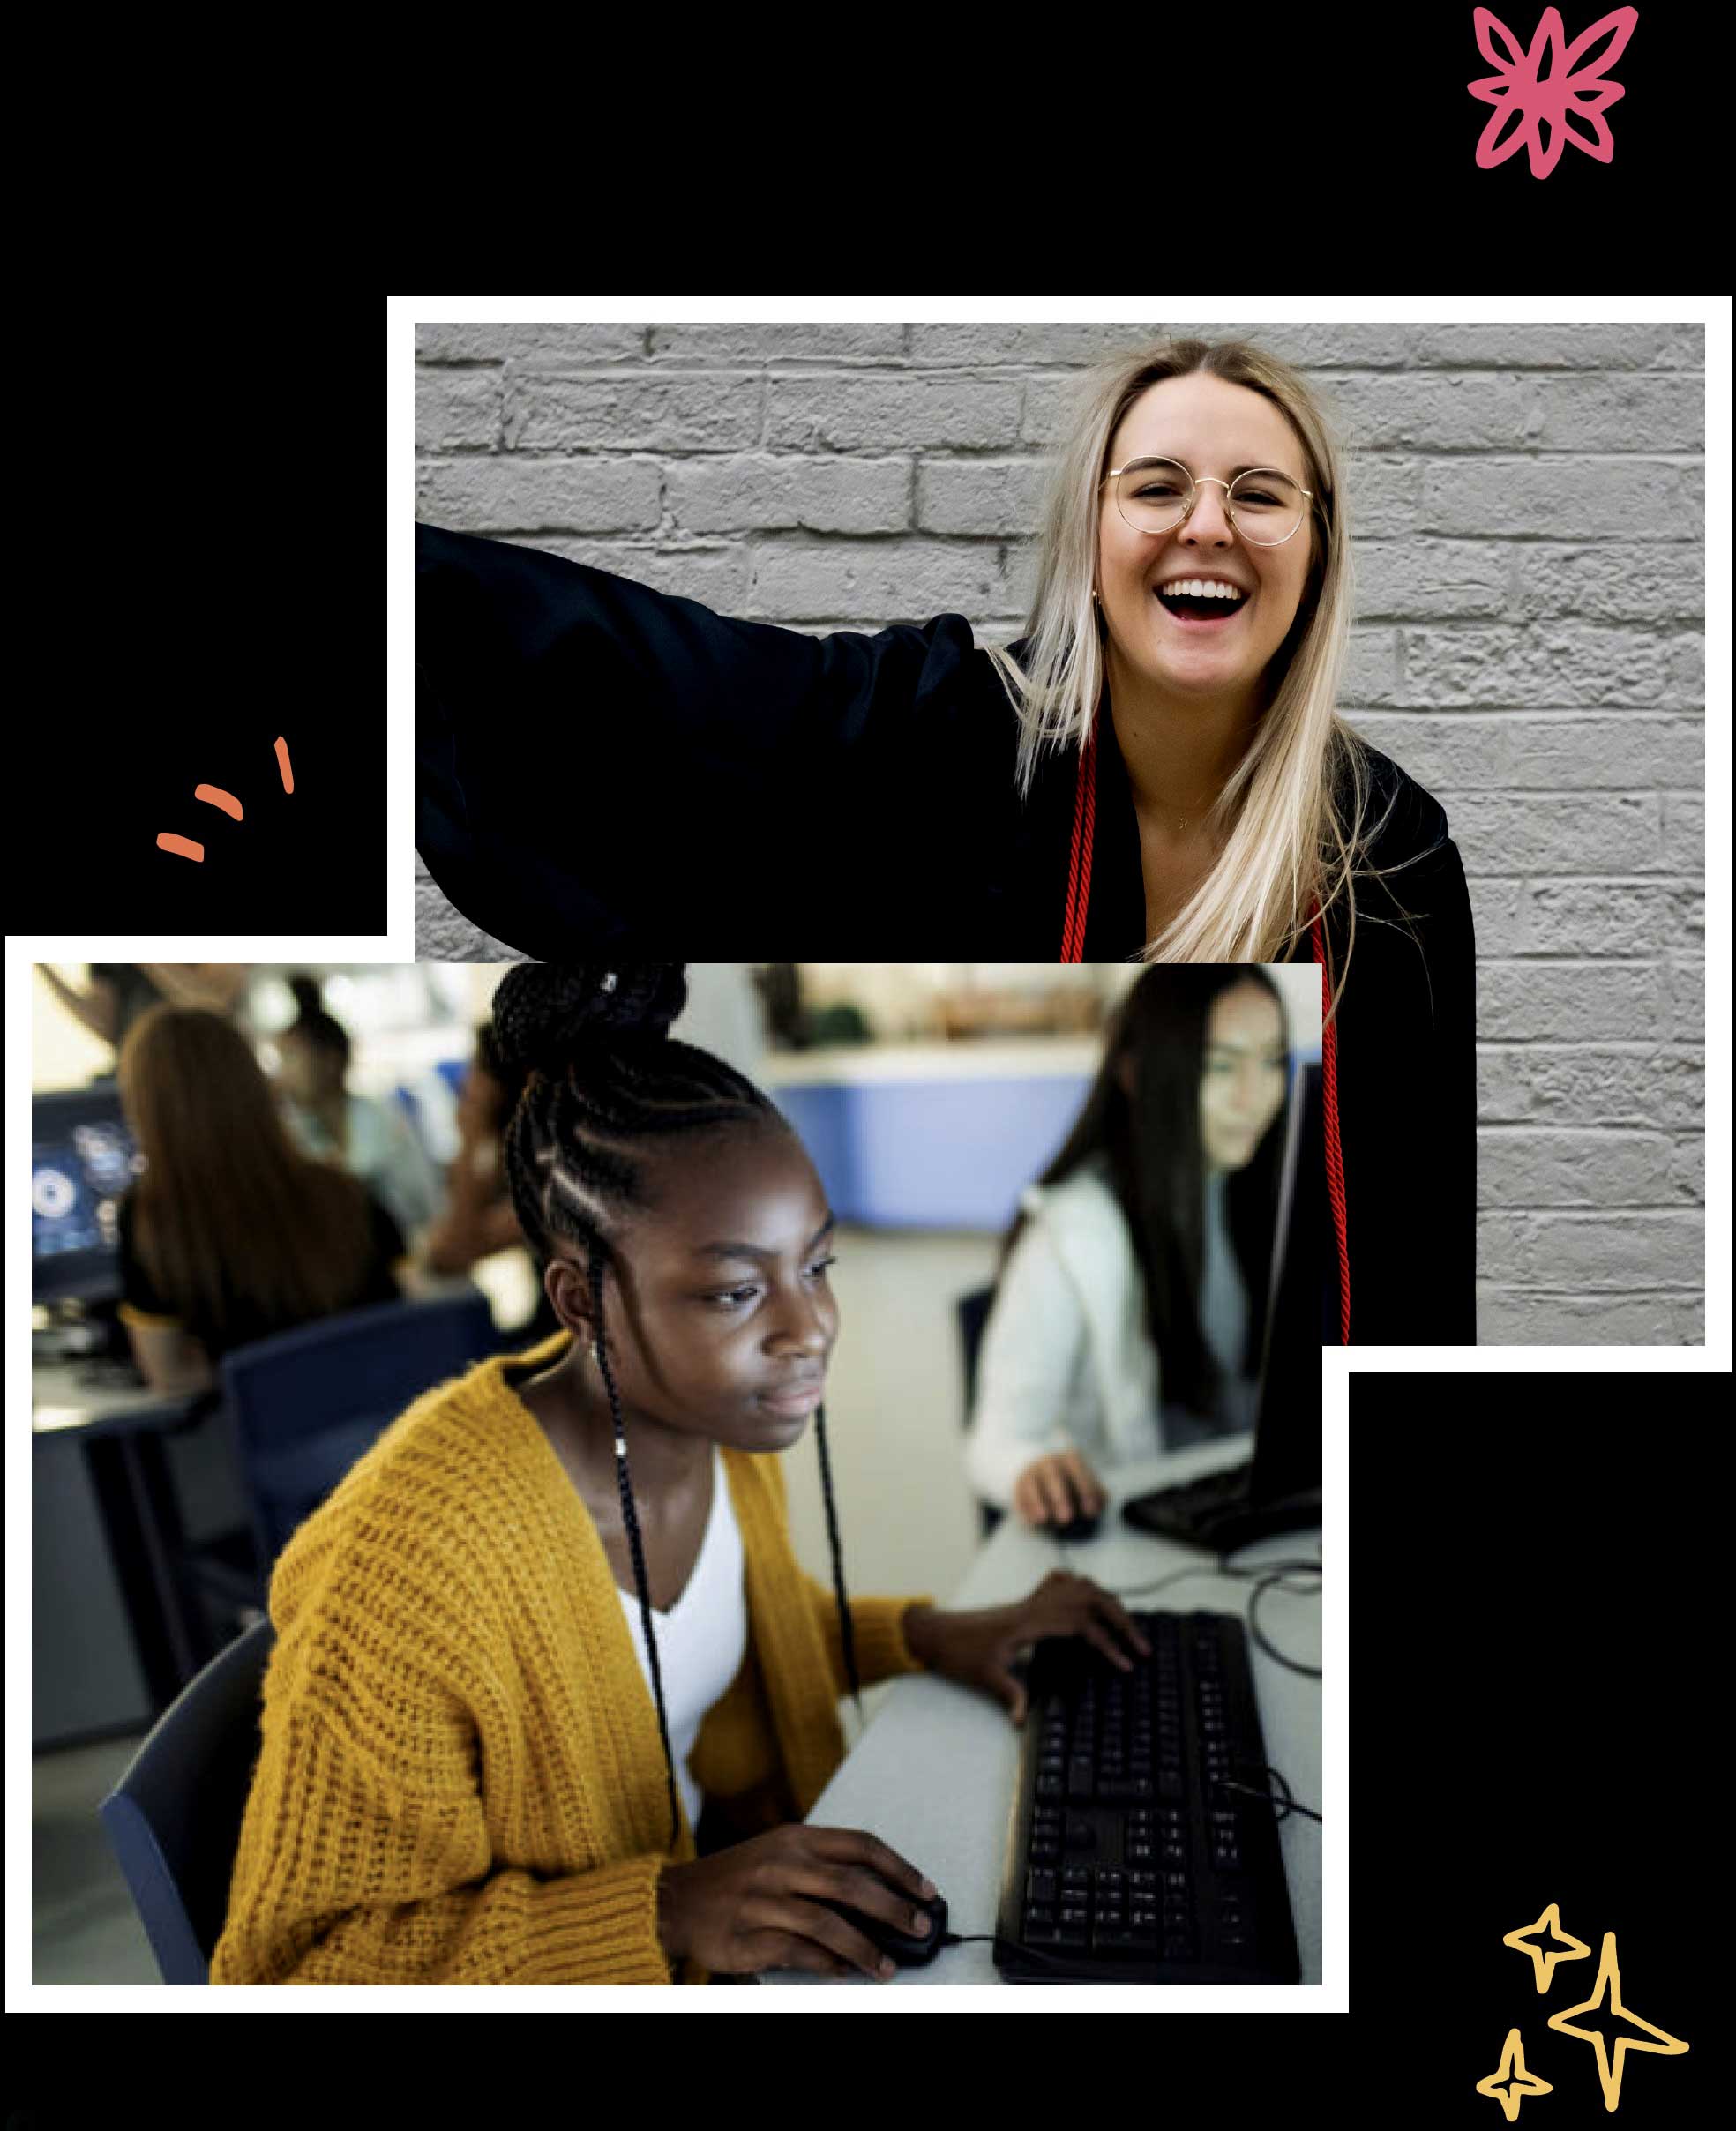 Picture of recent graduate, and girl at computer working in library